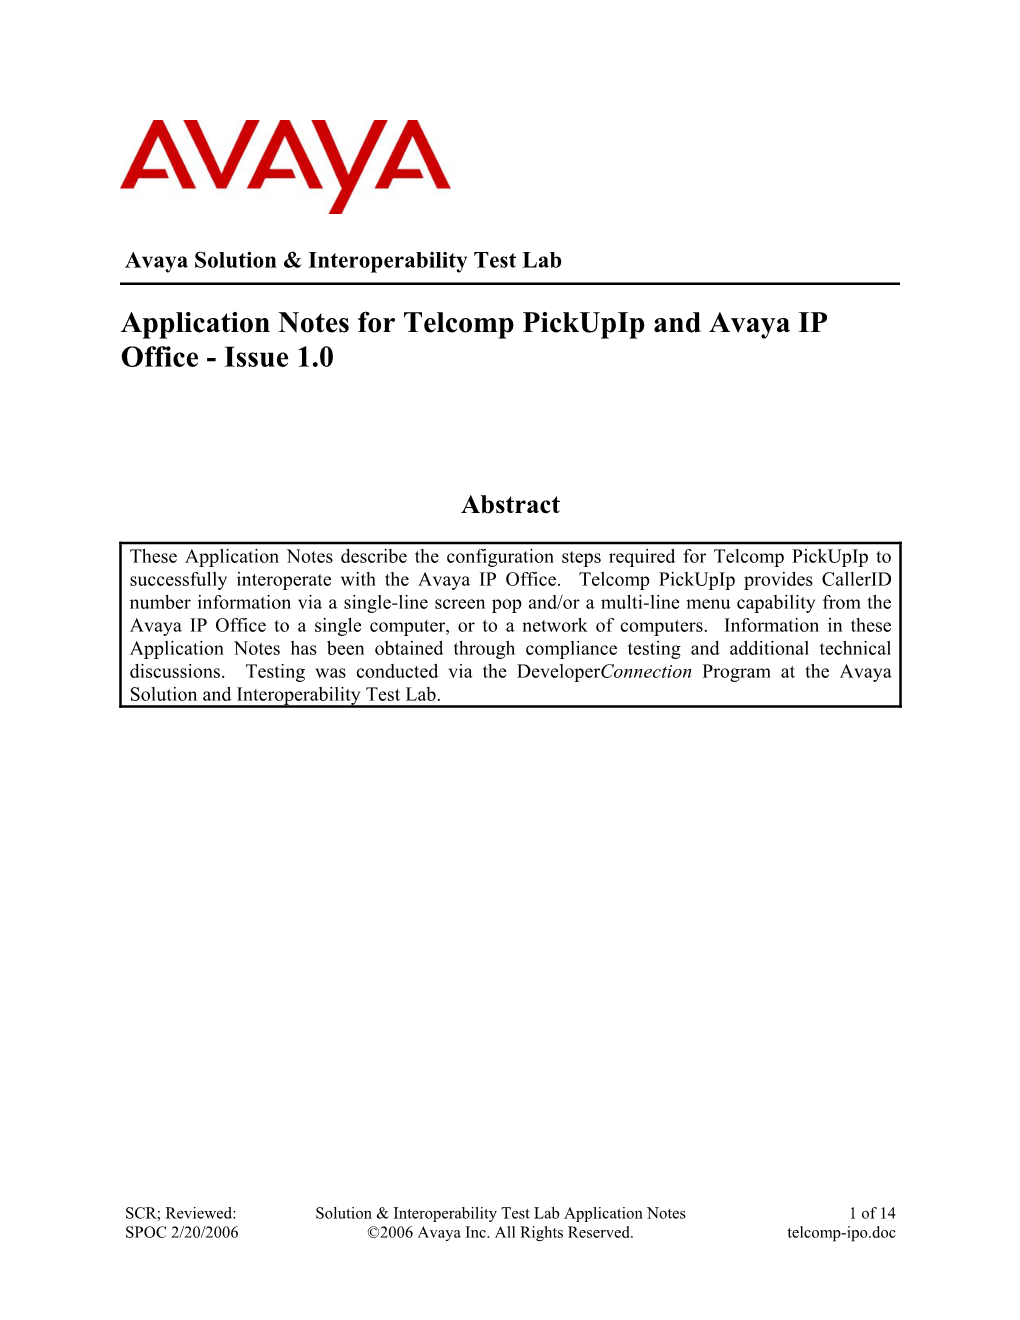 Application Notes for Telcomp Pickupip and Avaya IP Office - Issue 1.0